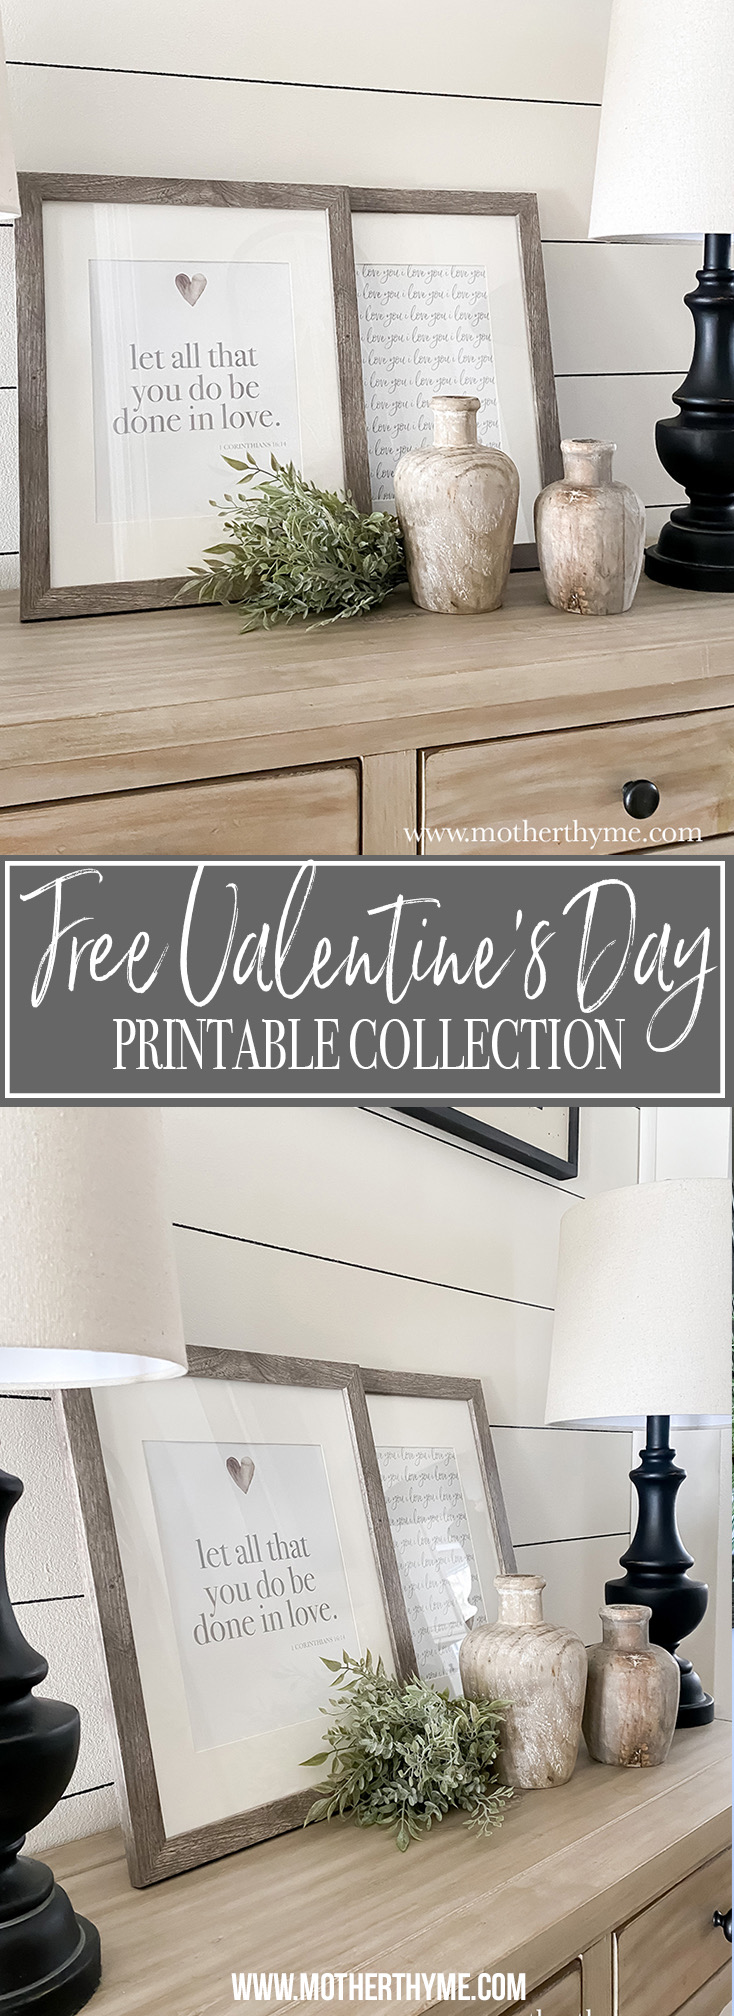 Free Valentine's Day Printable Collection